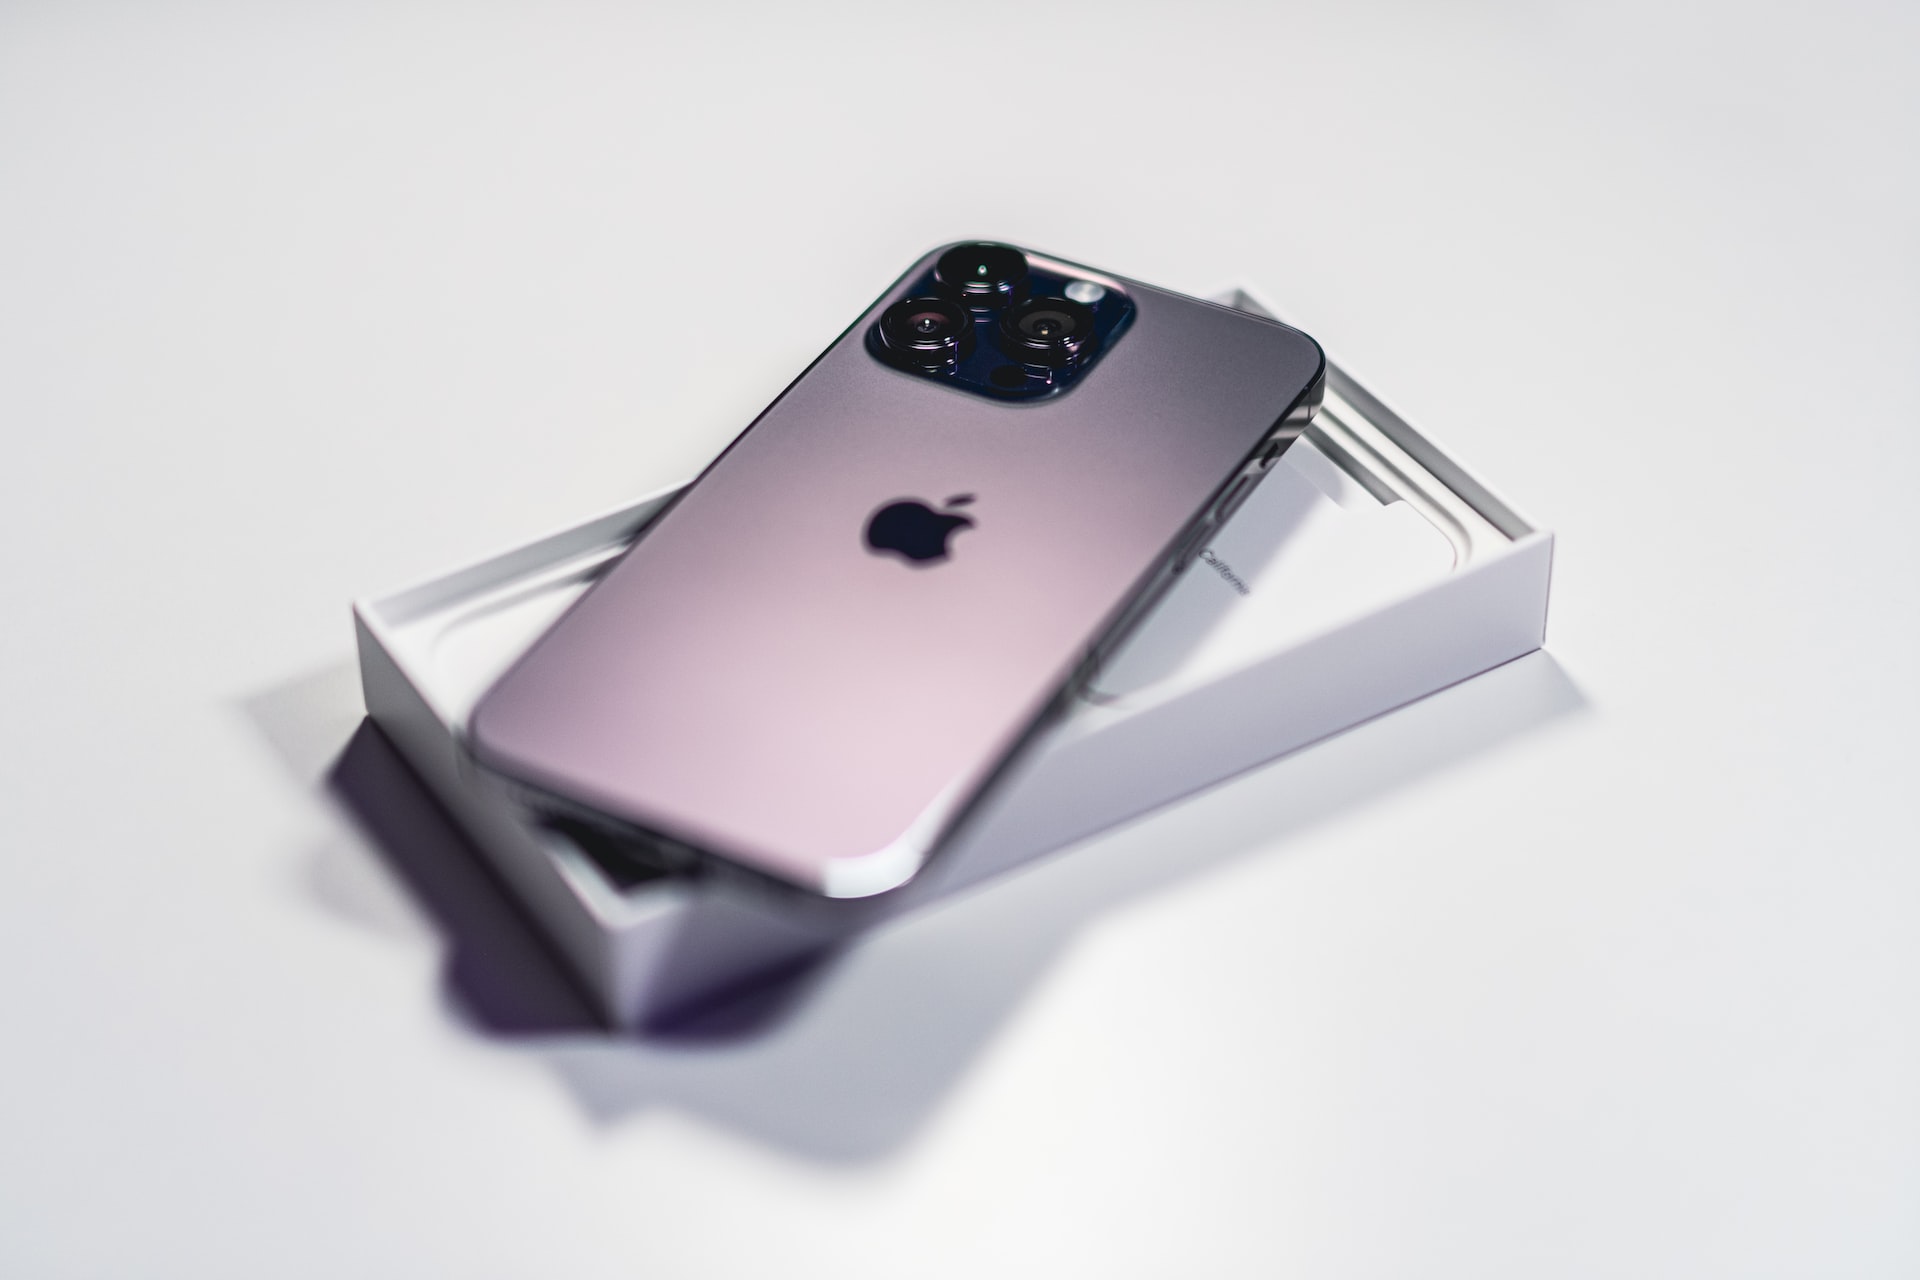 iPhone Ultra: News and Expected Price, Release Date, Specs; and More Rumors